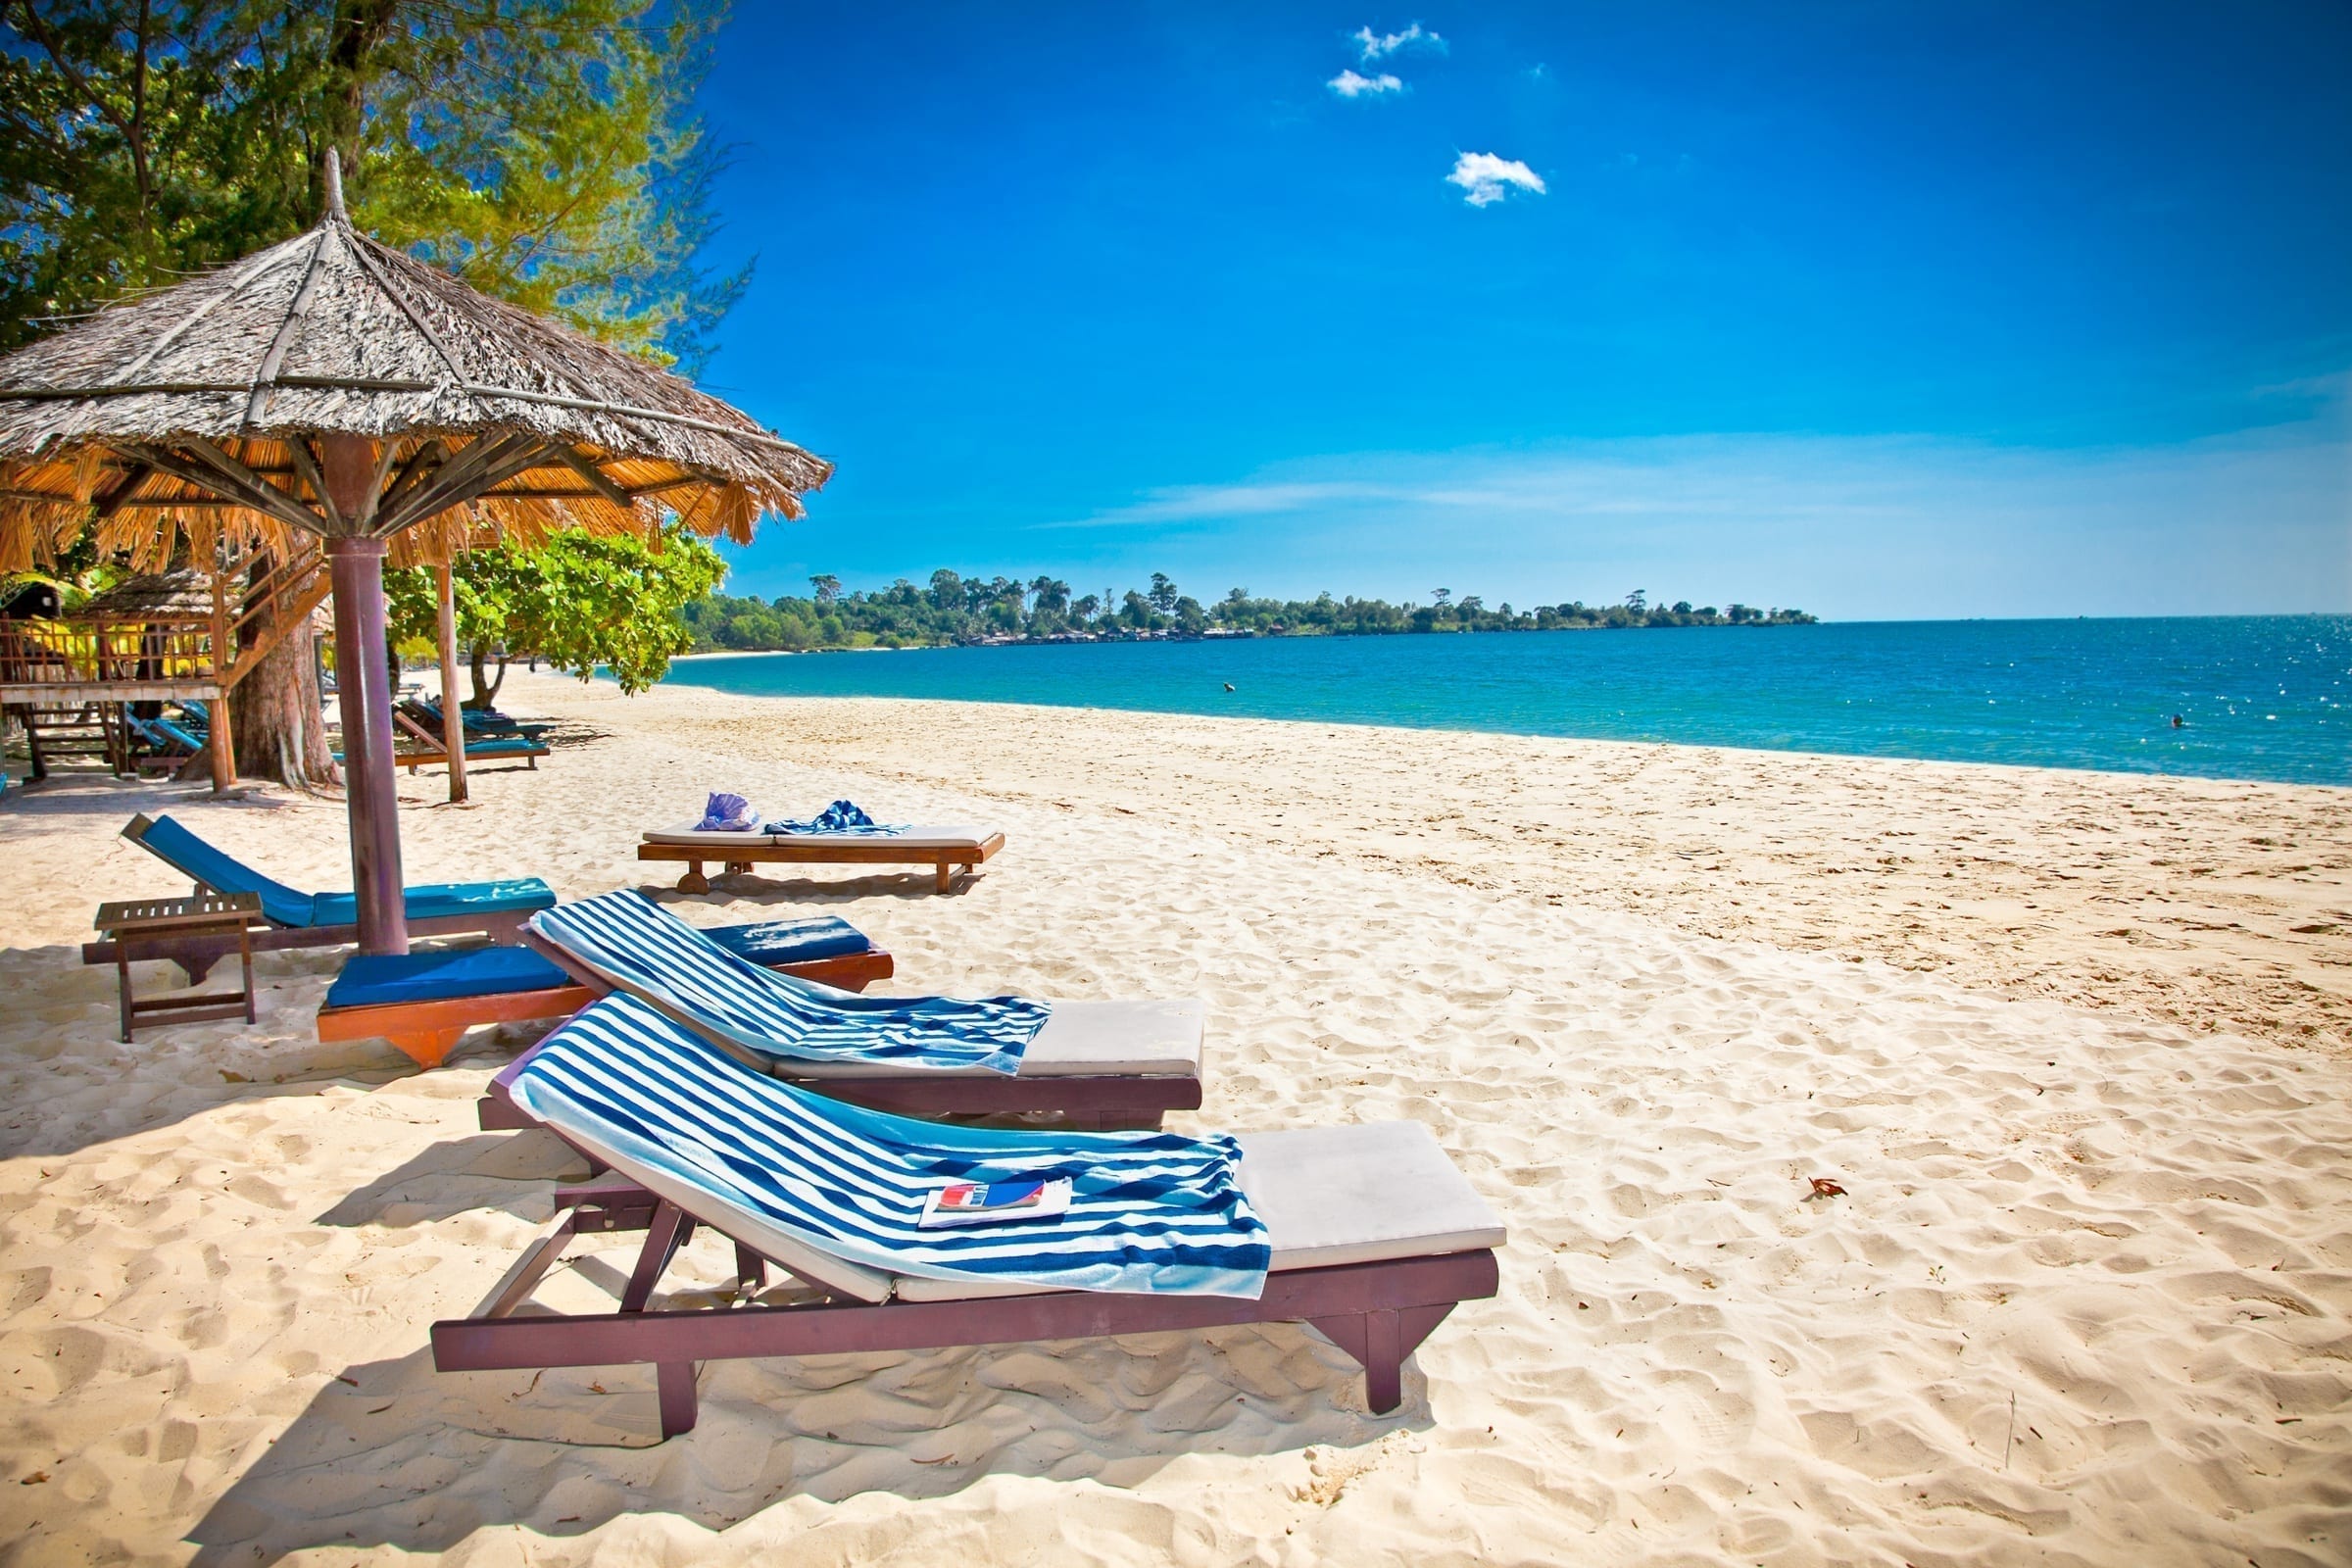 Sokha Beach, Sihanoukville, Cambodia is included in Cambodia tours offered by Asia Vacation Group